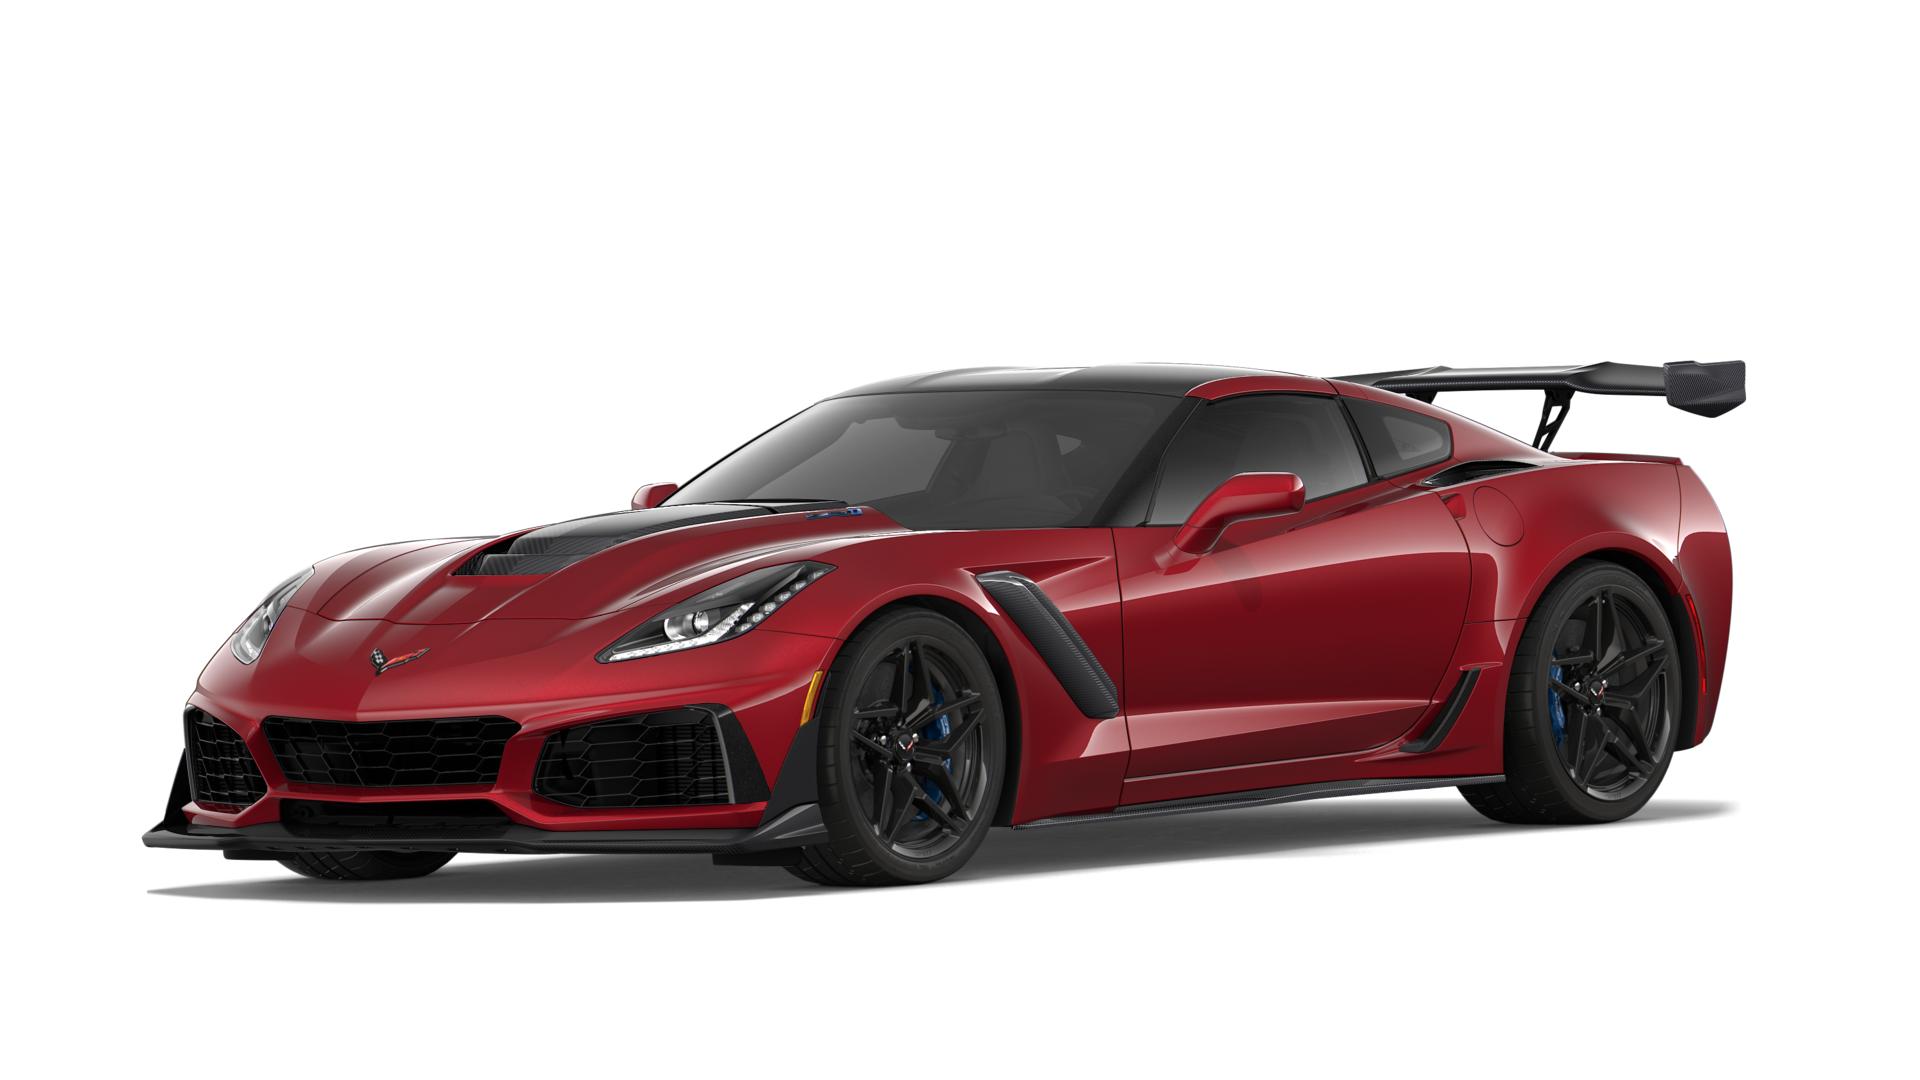 2019 Corvette ZR1 Coupe in Long Beach Red Metallic with the ZTK Track Performance Package